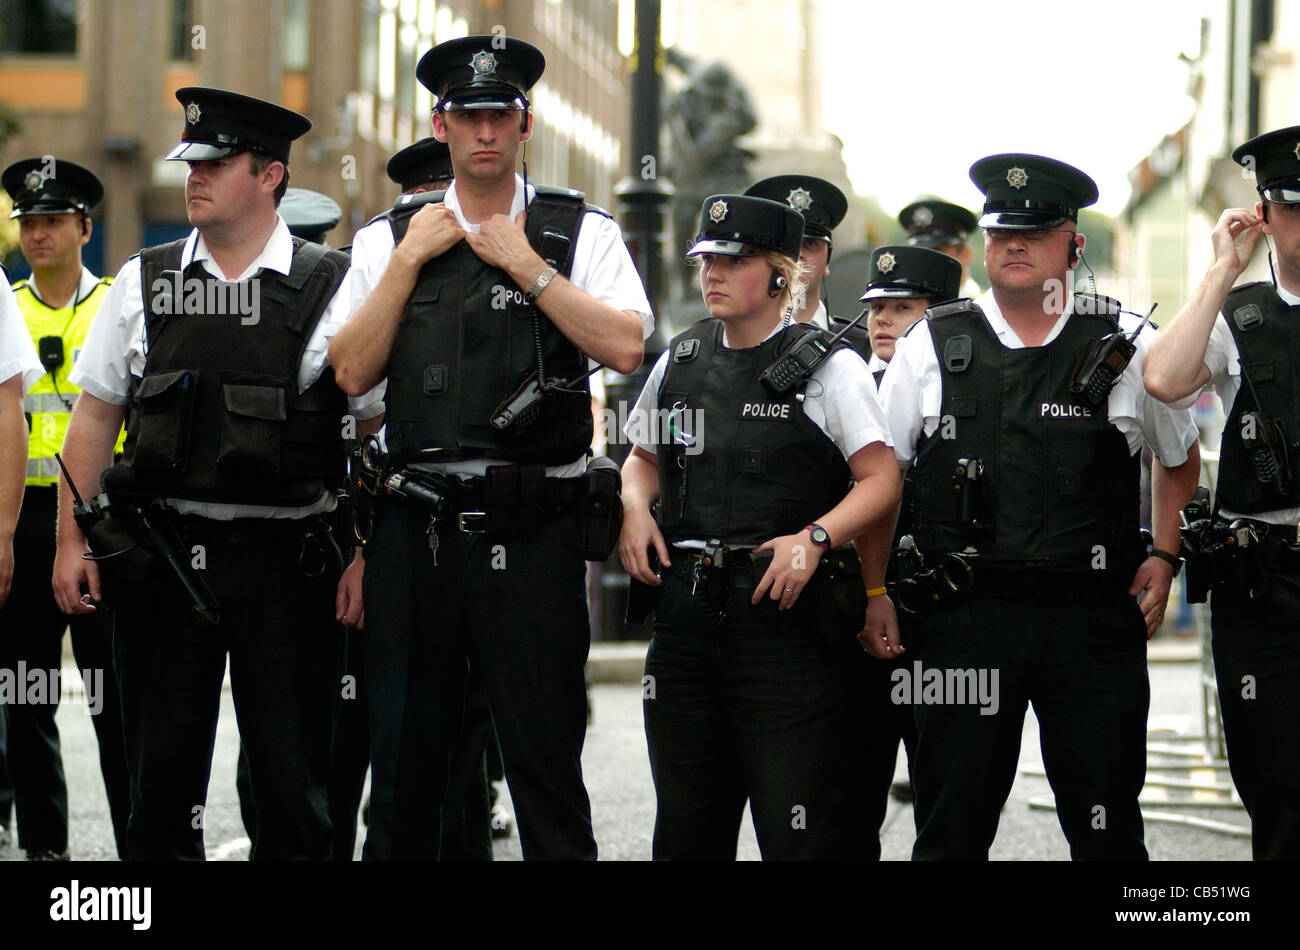 PSNI officers on duty during loyalist parade in Londonderry, Northern Ireland. Stock Photo